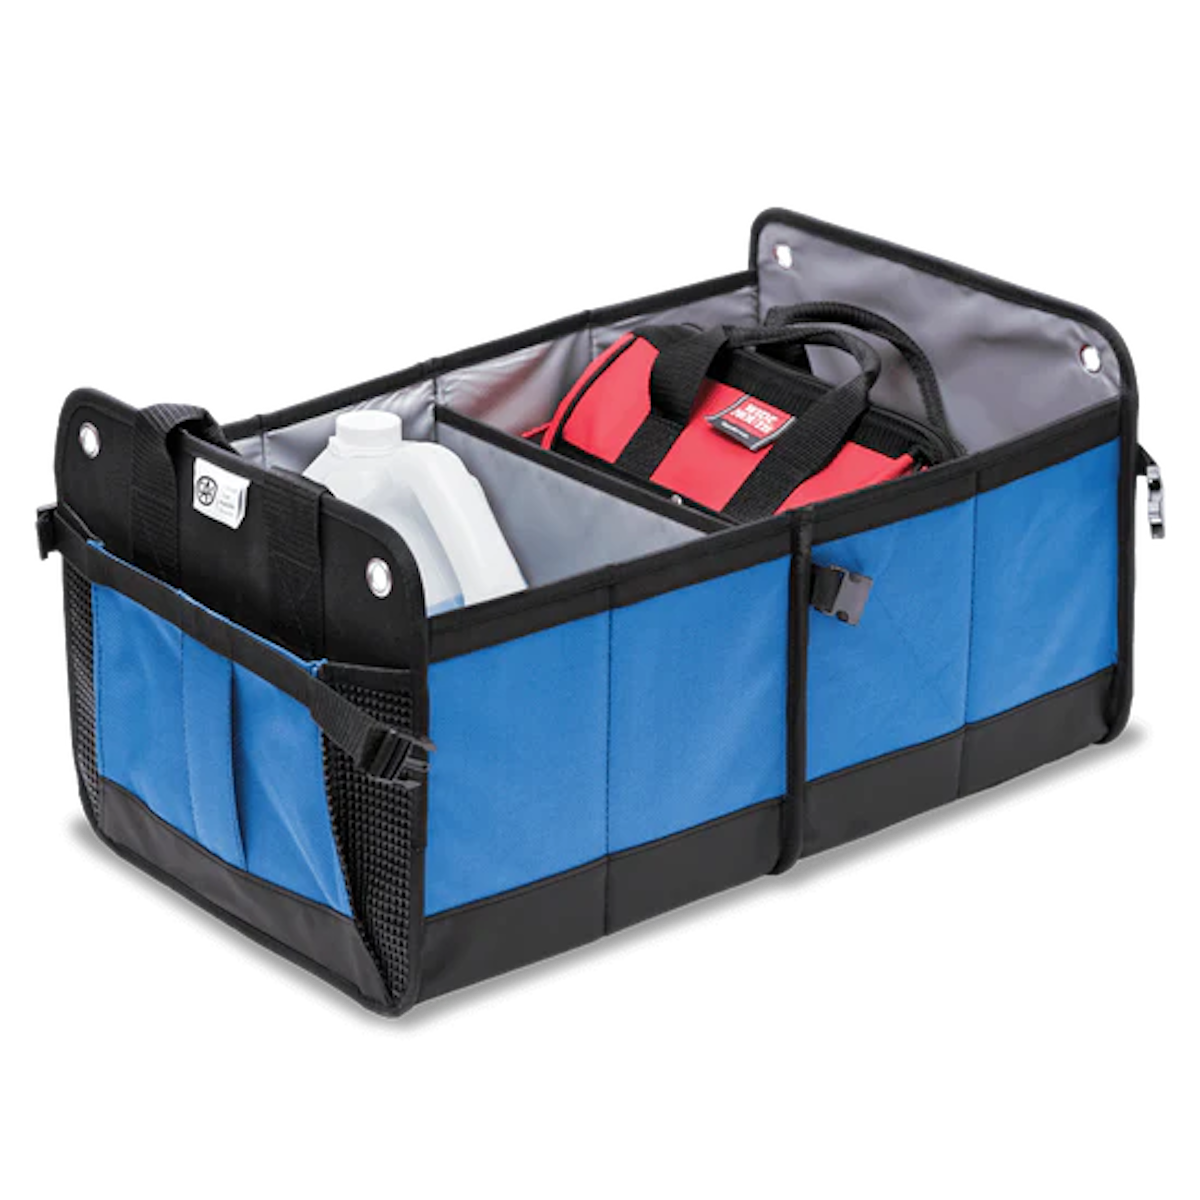 A blue and black car trunk bag with two compartments.